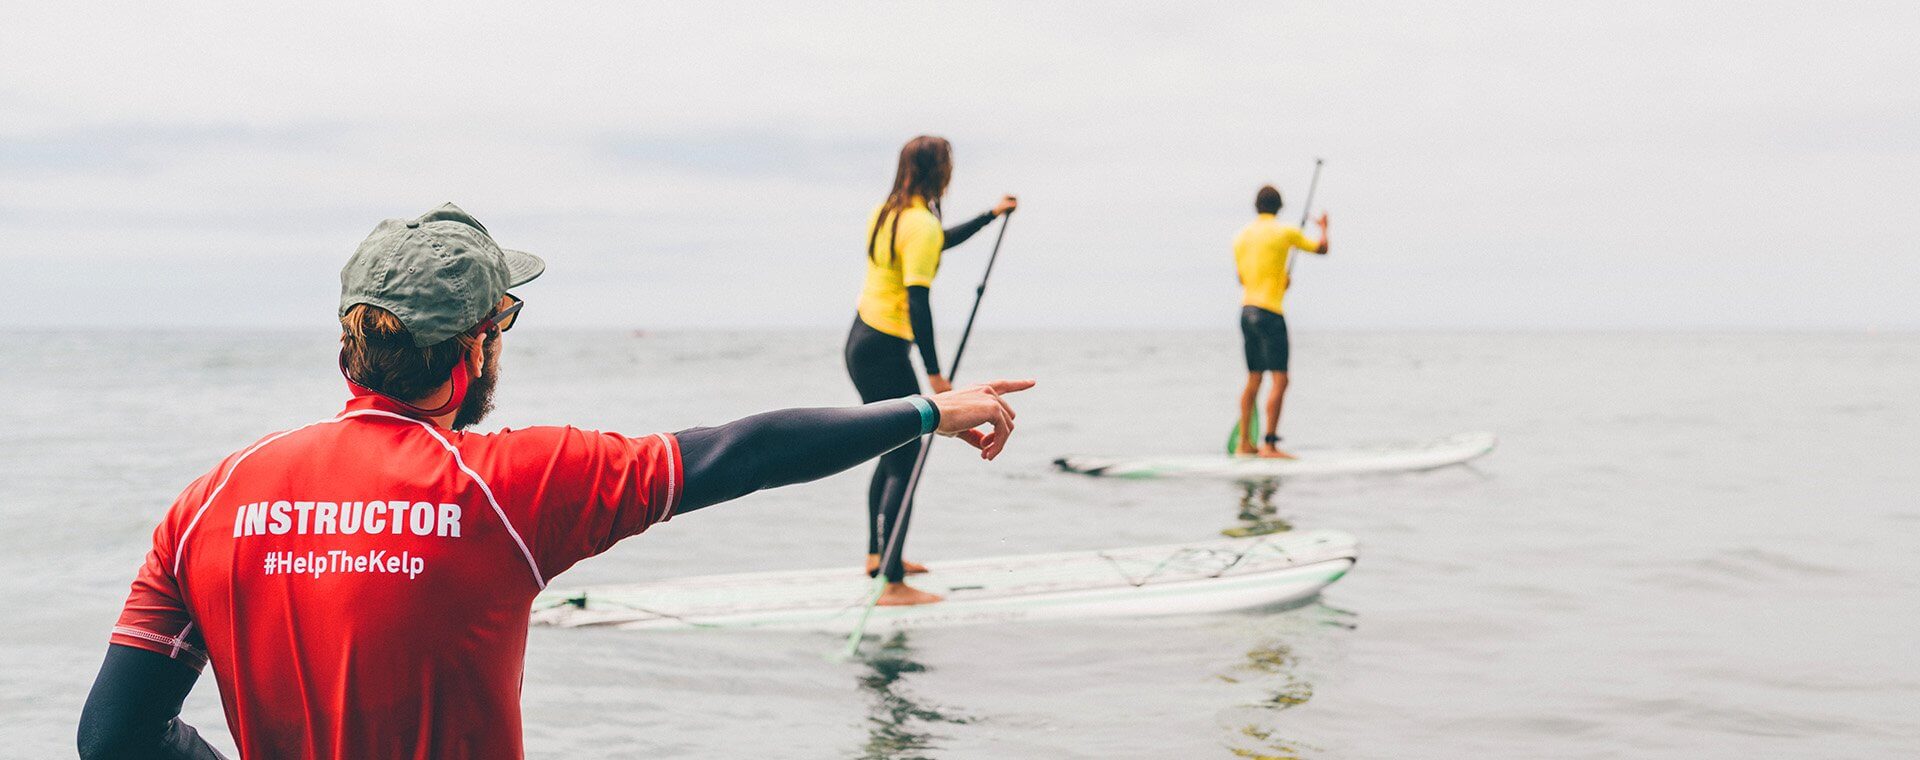 Lessons - SUP Lessons with Everyday California in La Jolla, California. Two people on their paddle boards in the water getting instructions on how to paddle on their Stand Up Paddle Board. With their instructor from Everyday California 